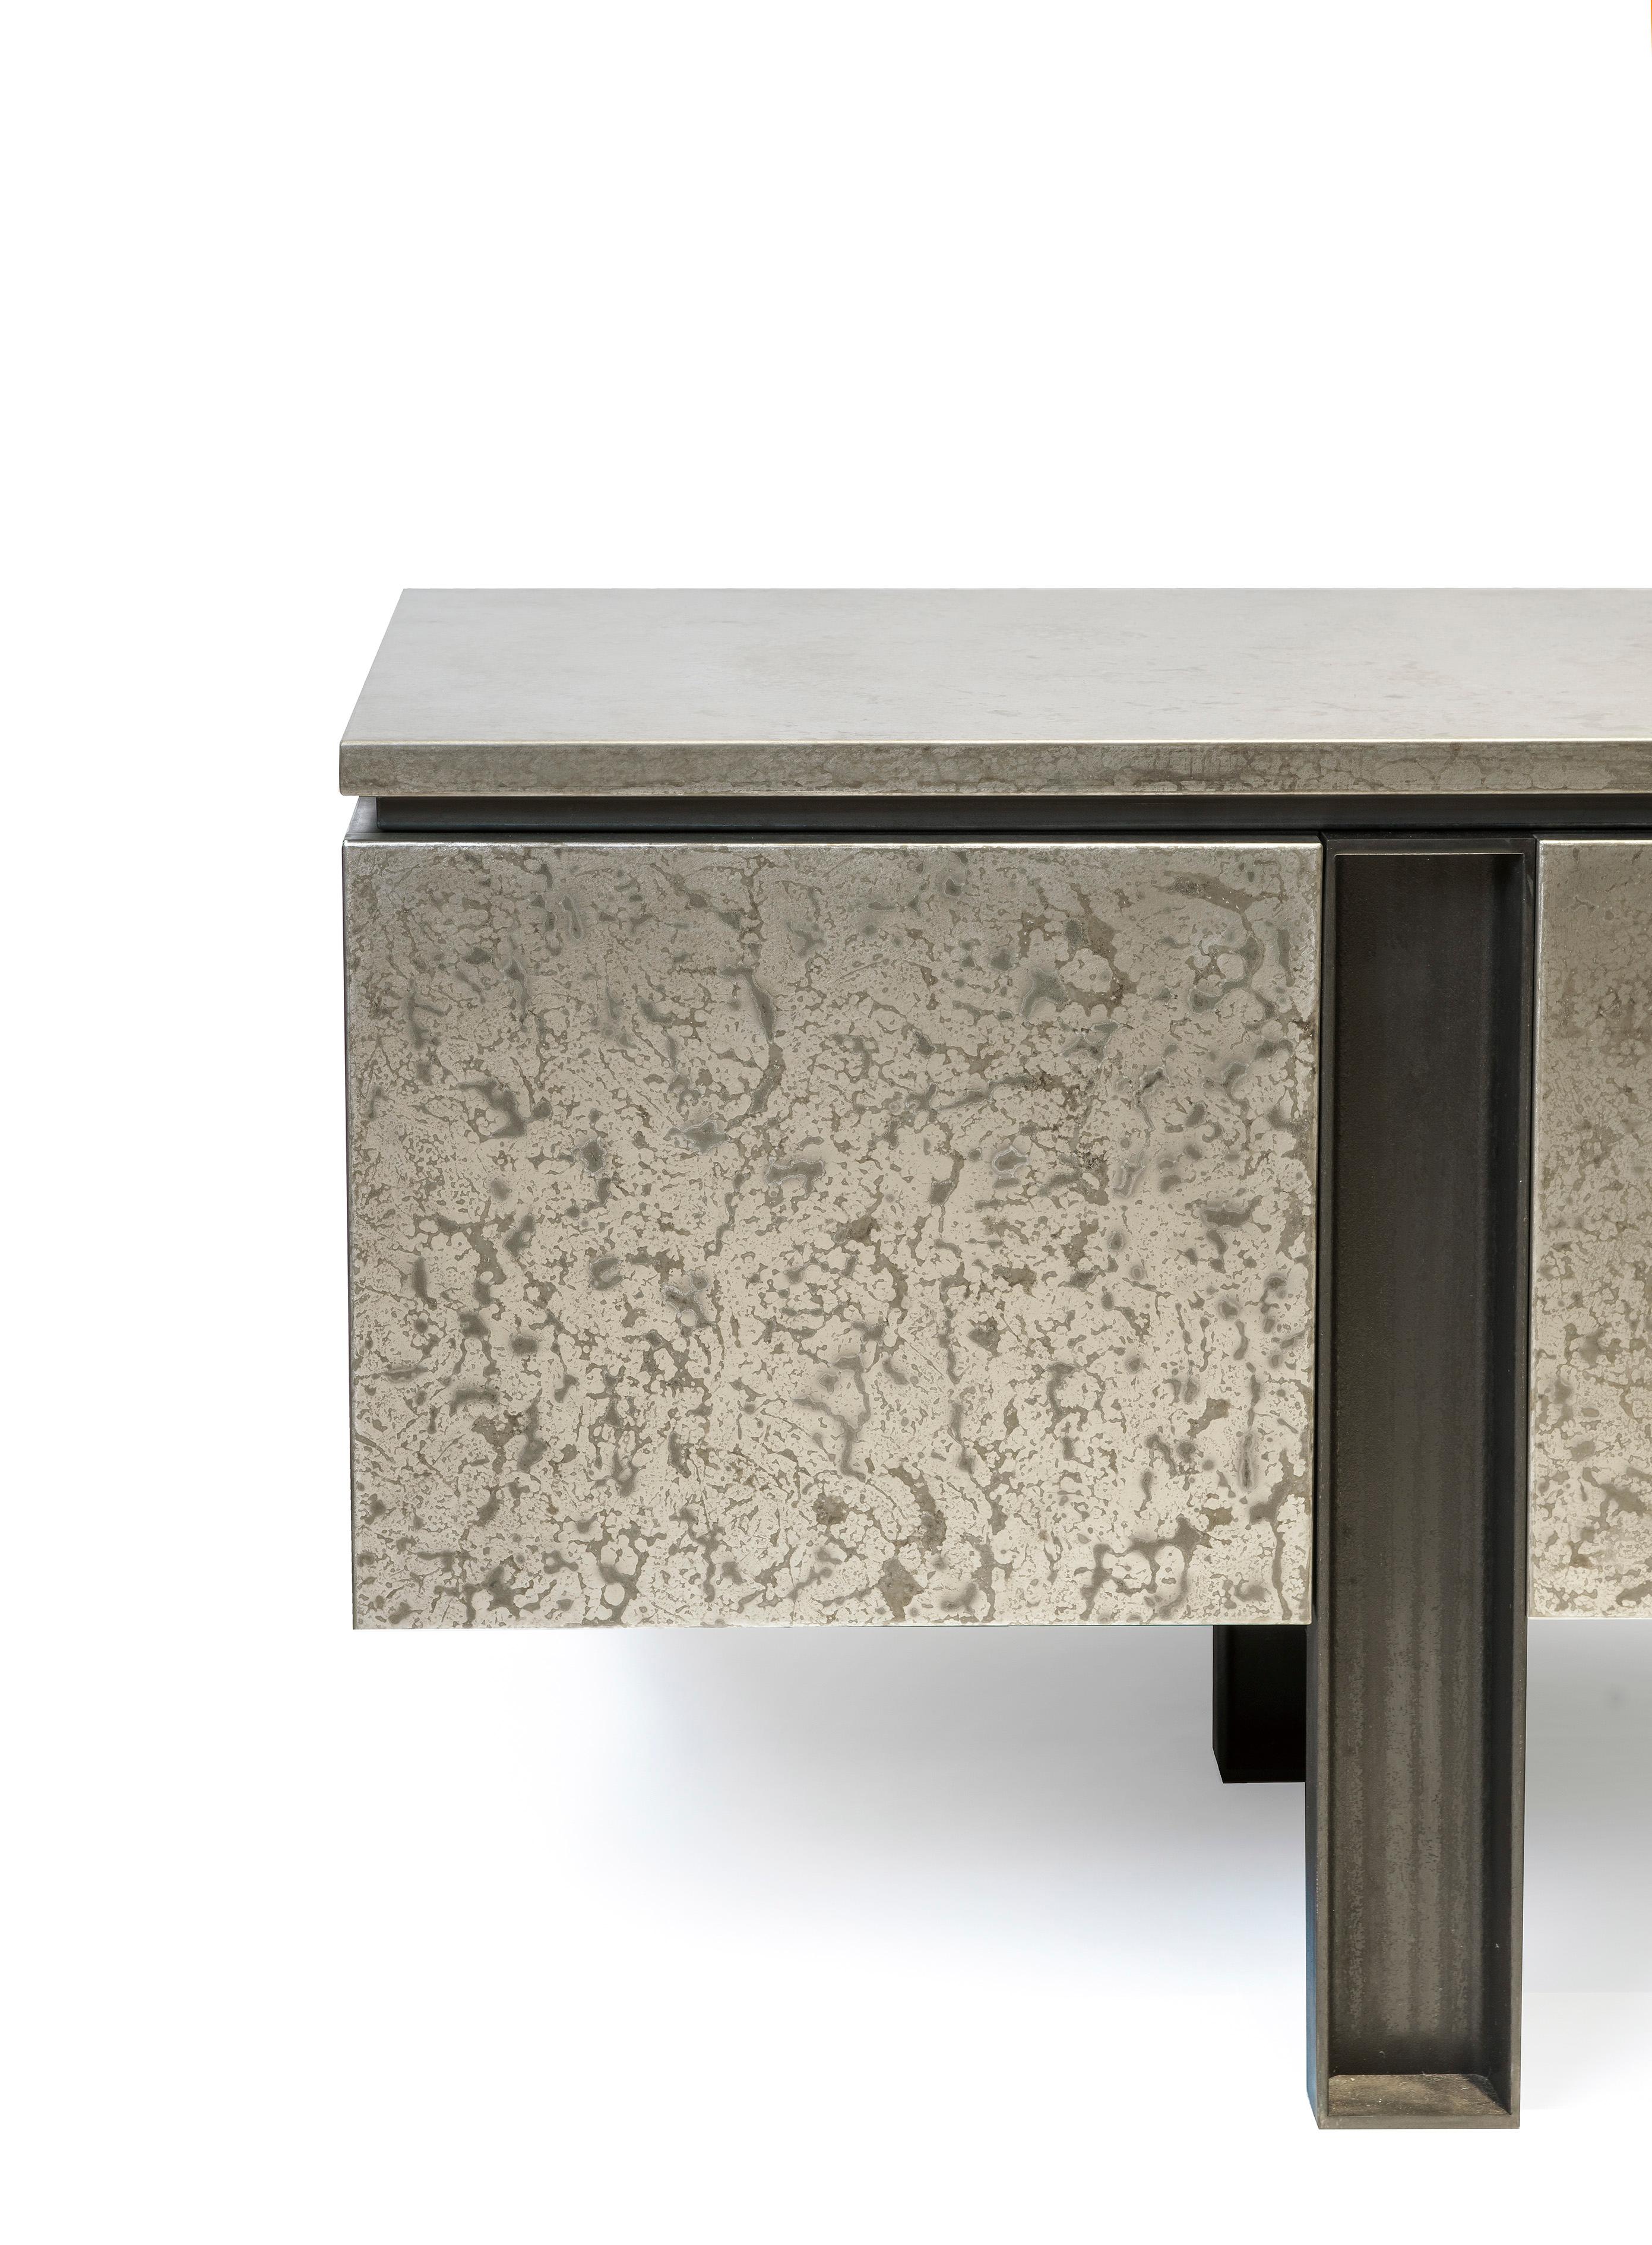 Stefano Del Vecchio worked closely with metal artisans to produce this artfully imagined credenza. Collaborating with Italy’s cherished traditional craftsmen was an integral part of developing Delvis Unlimited’s latest collection and remains an